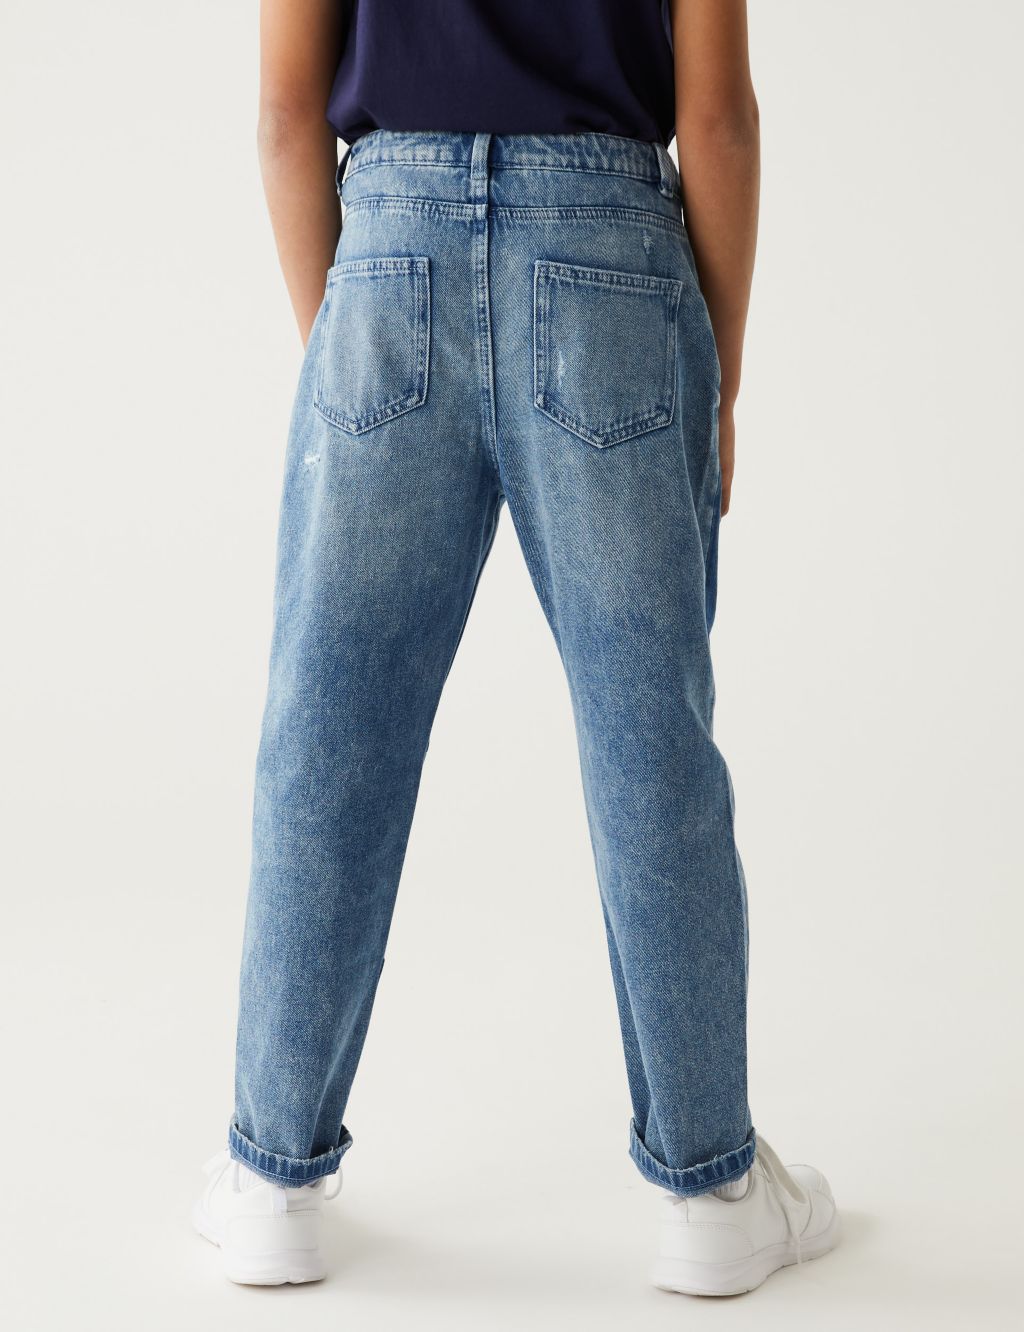 Relaxed Patchwork Denim Jean (6-16 Yrs) image 5